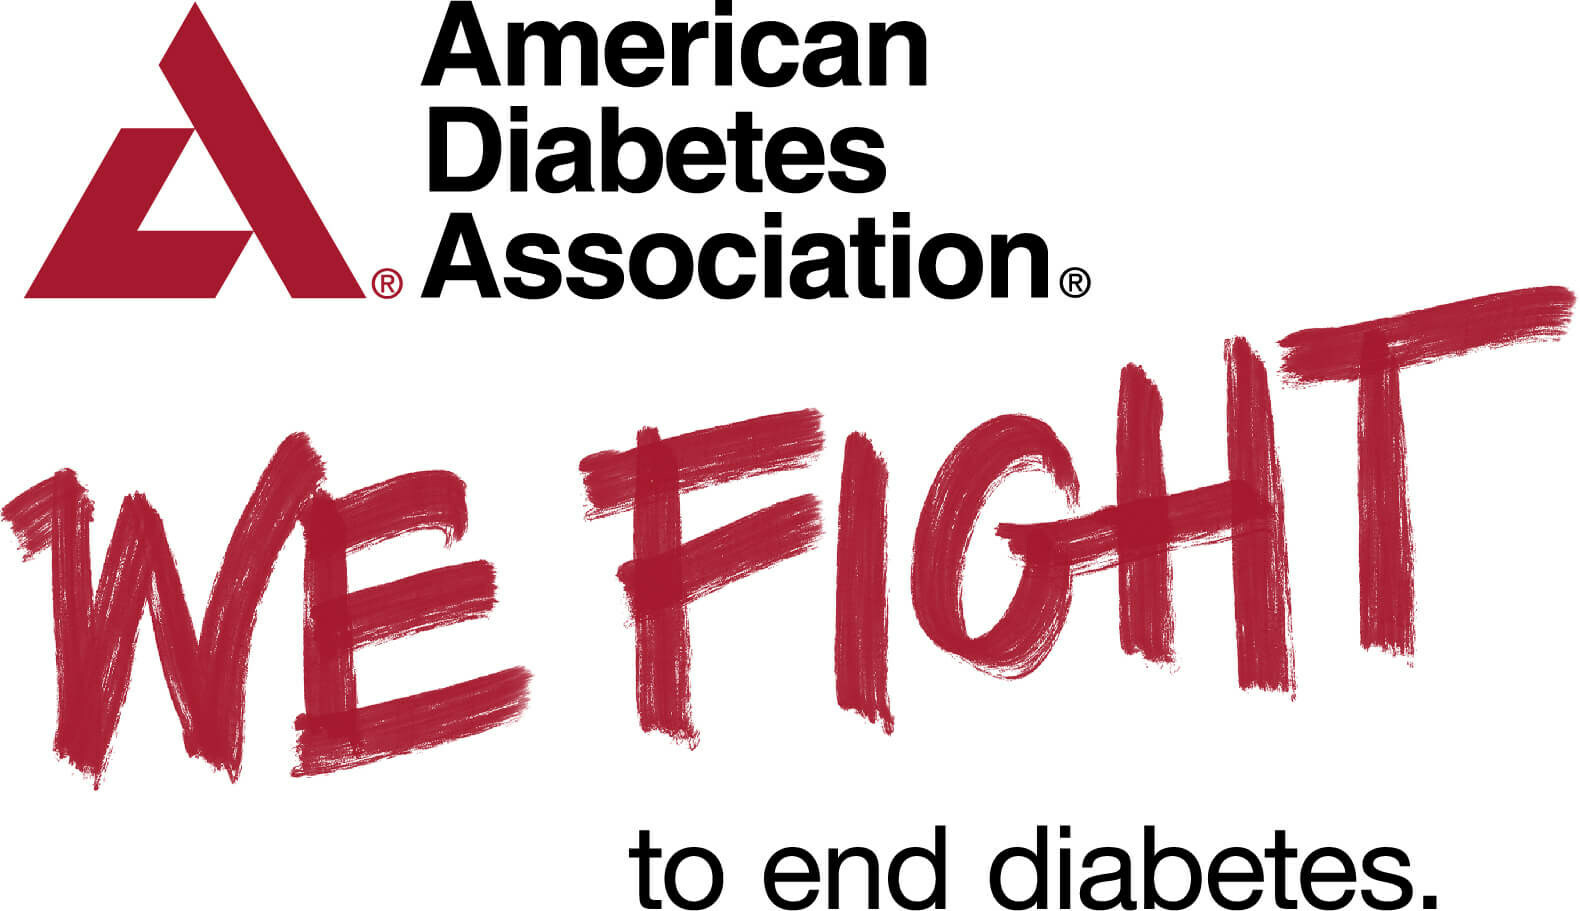 The American Diabetes Association Releases the Standards of Care in